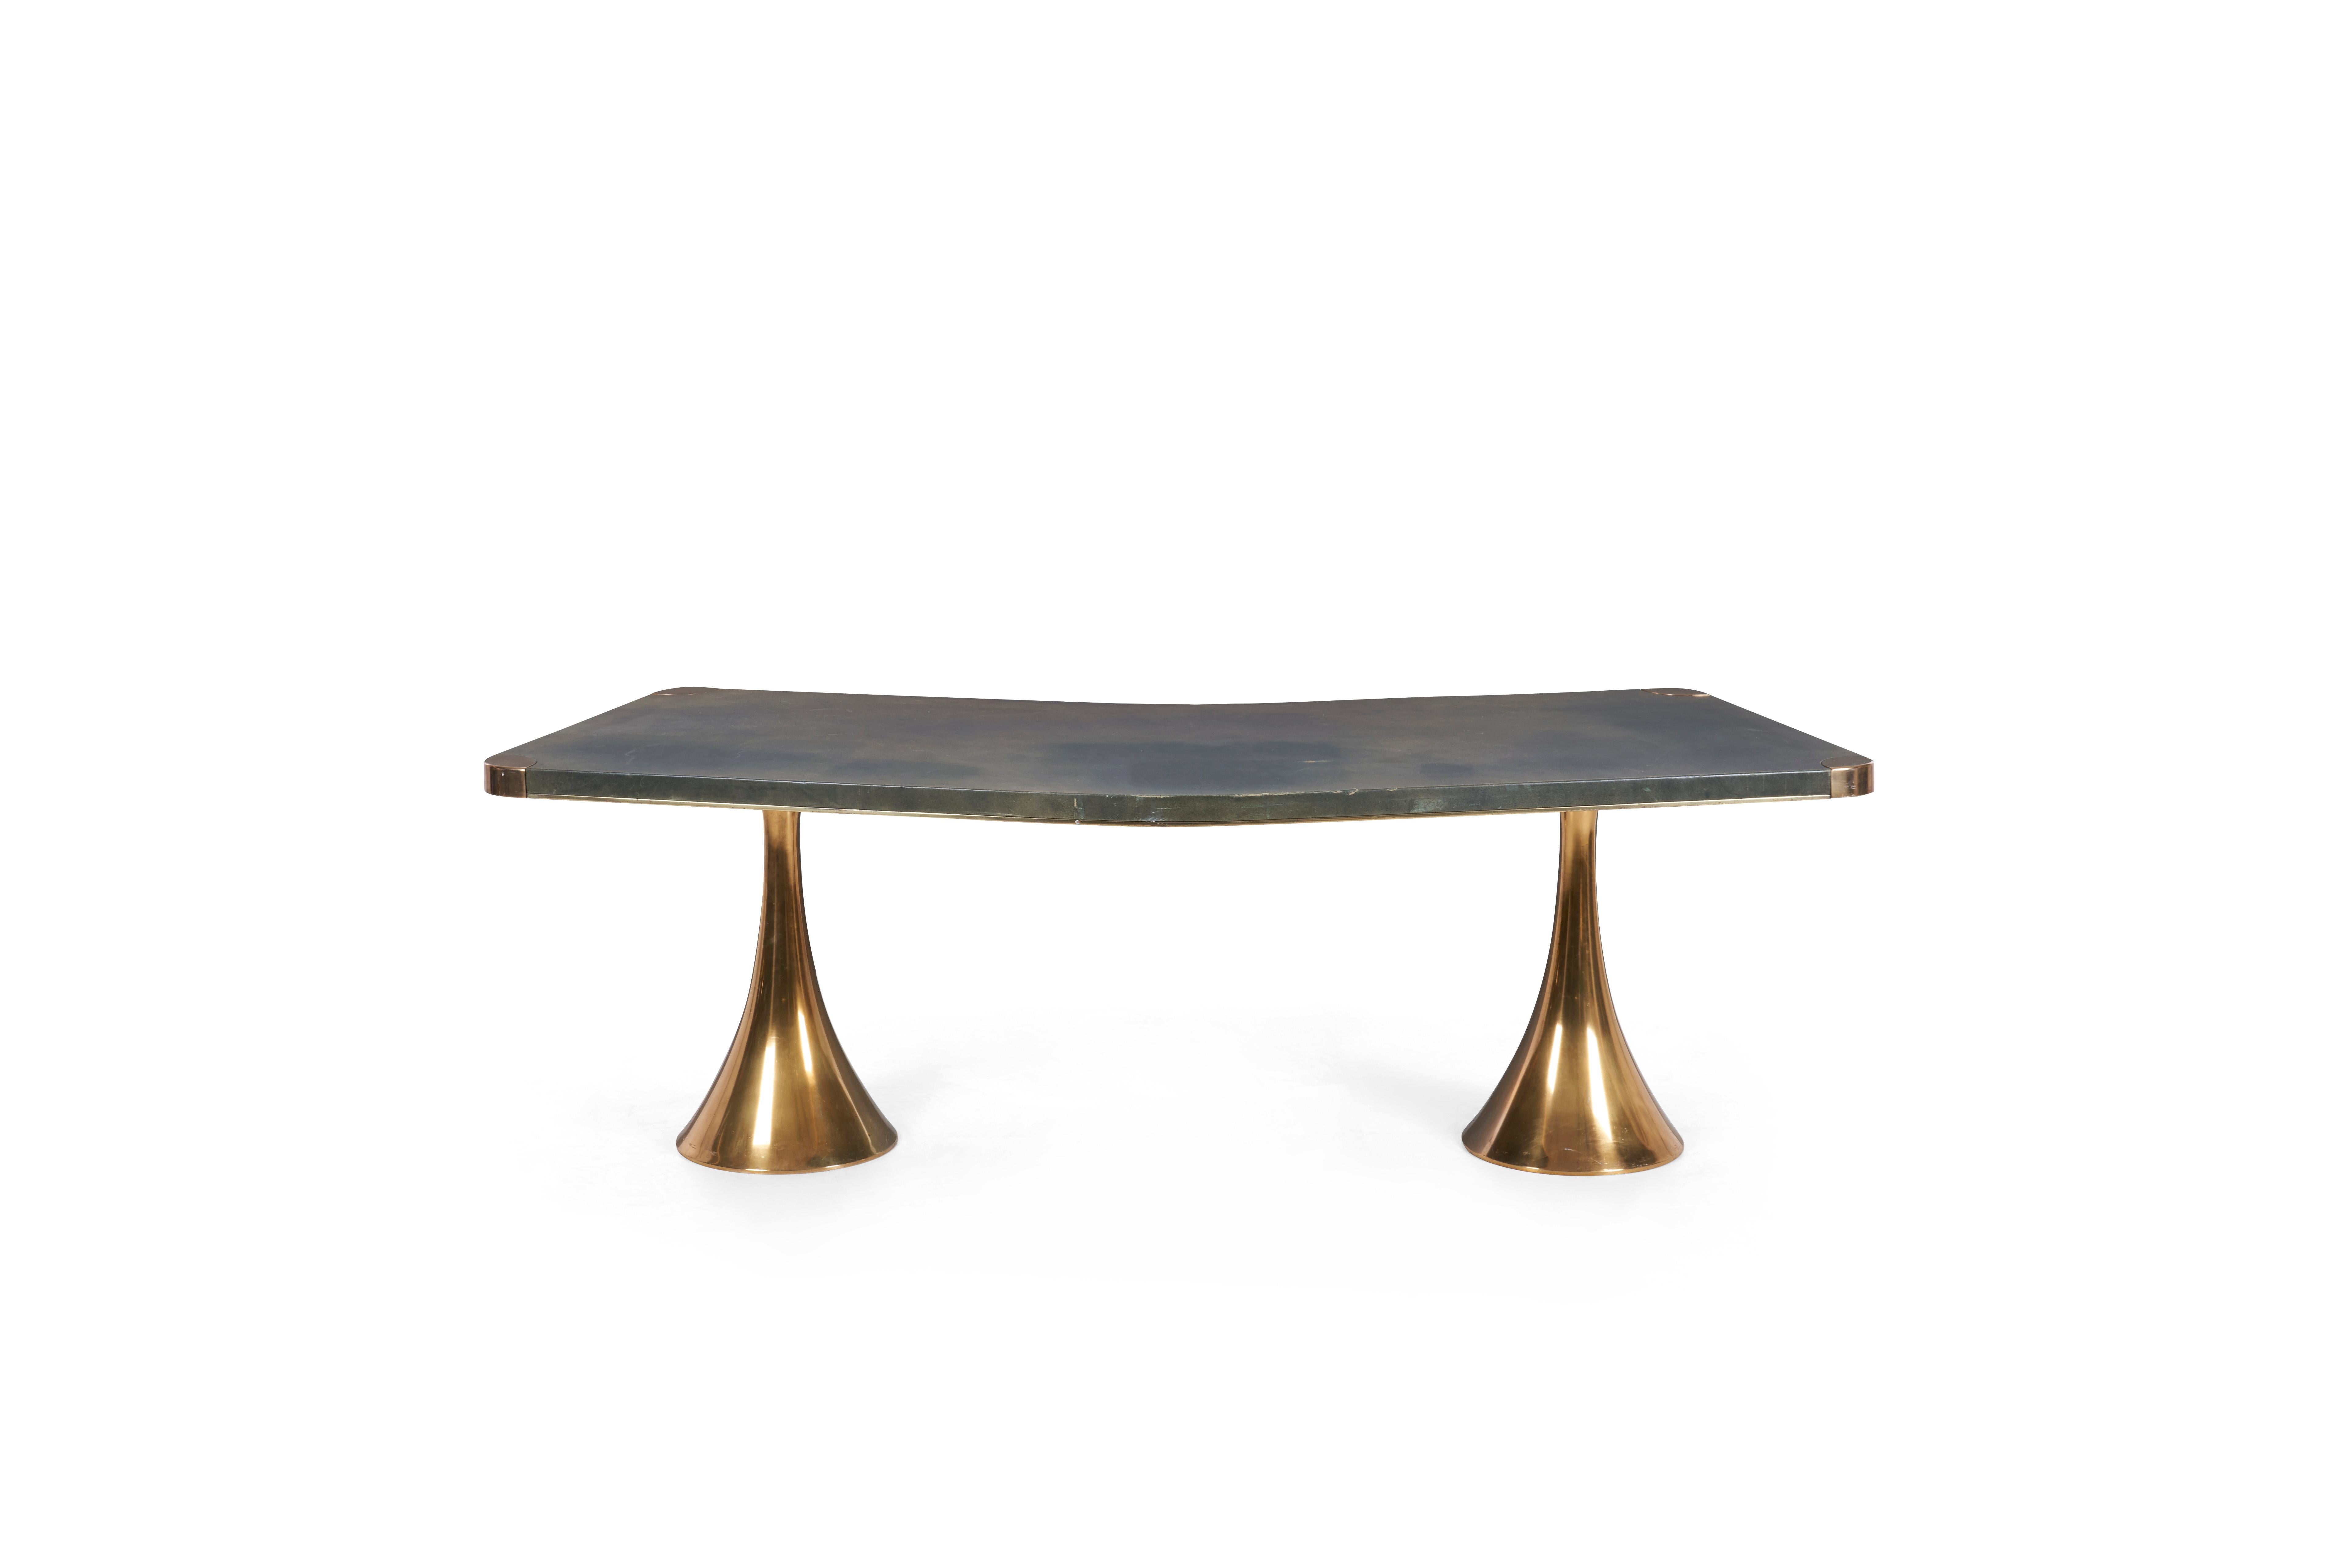 Osvaldo and Valeria Borsani unique desk for Tecno, Italy: leather, wood, solid brass. 
This desk is an excellent example of elite Italian design and craftsmanship. 
Commissioned for Joseph James Akston, La Rounda House 
Palm Beach,